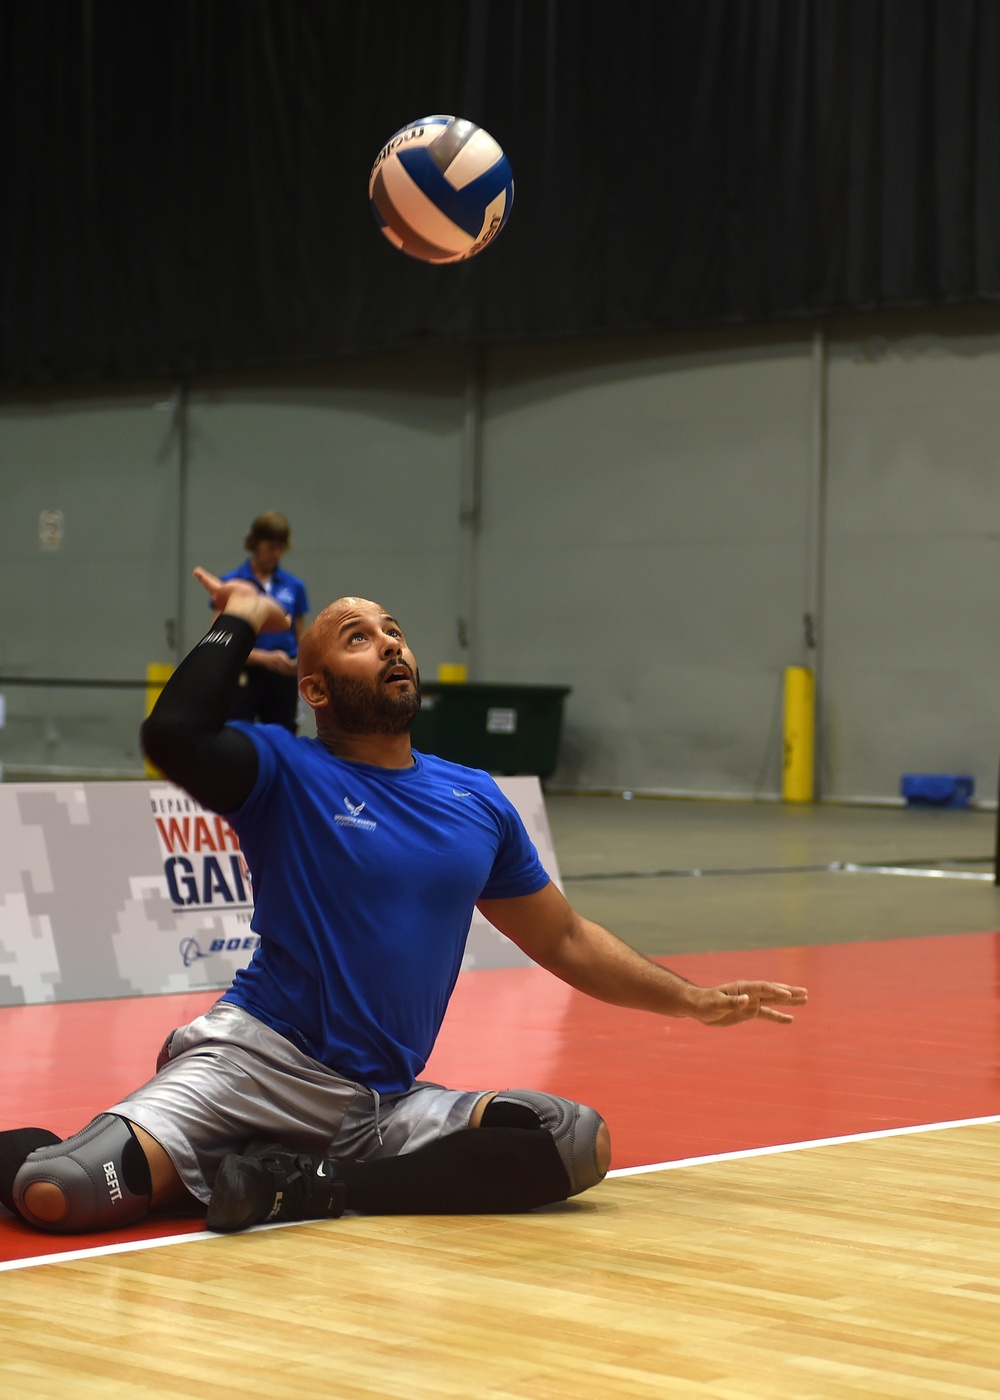 Air Force Volleyball Practice for Warrior Games